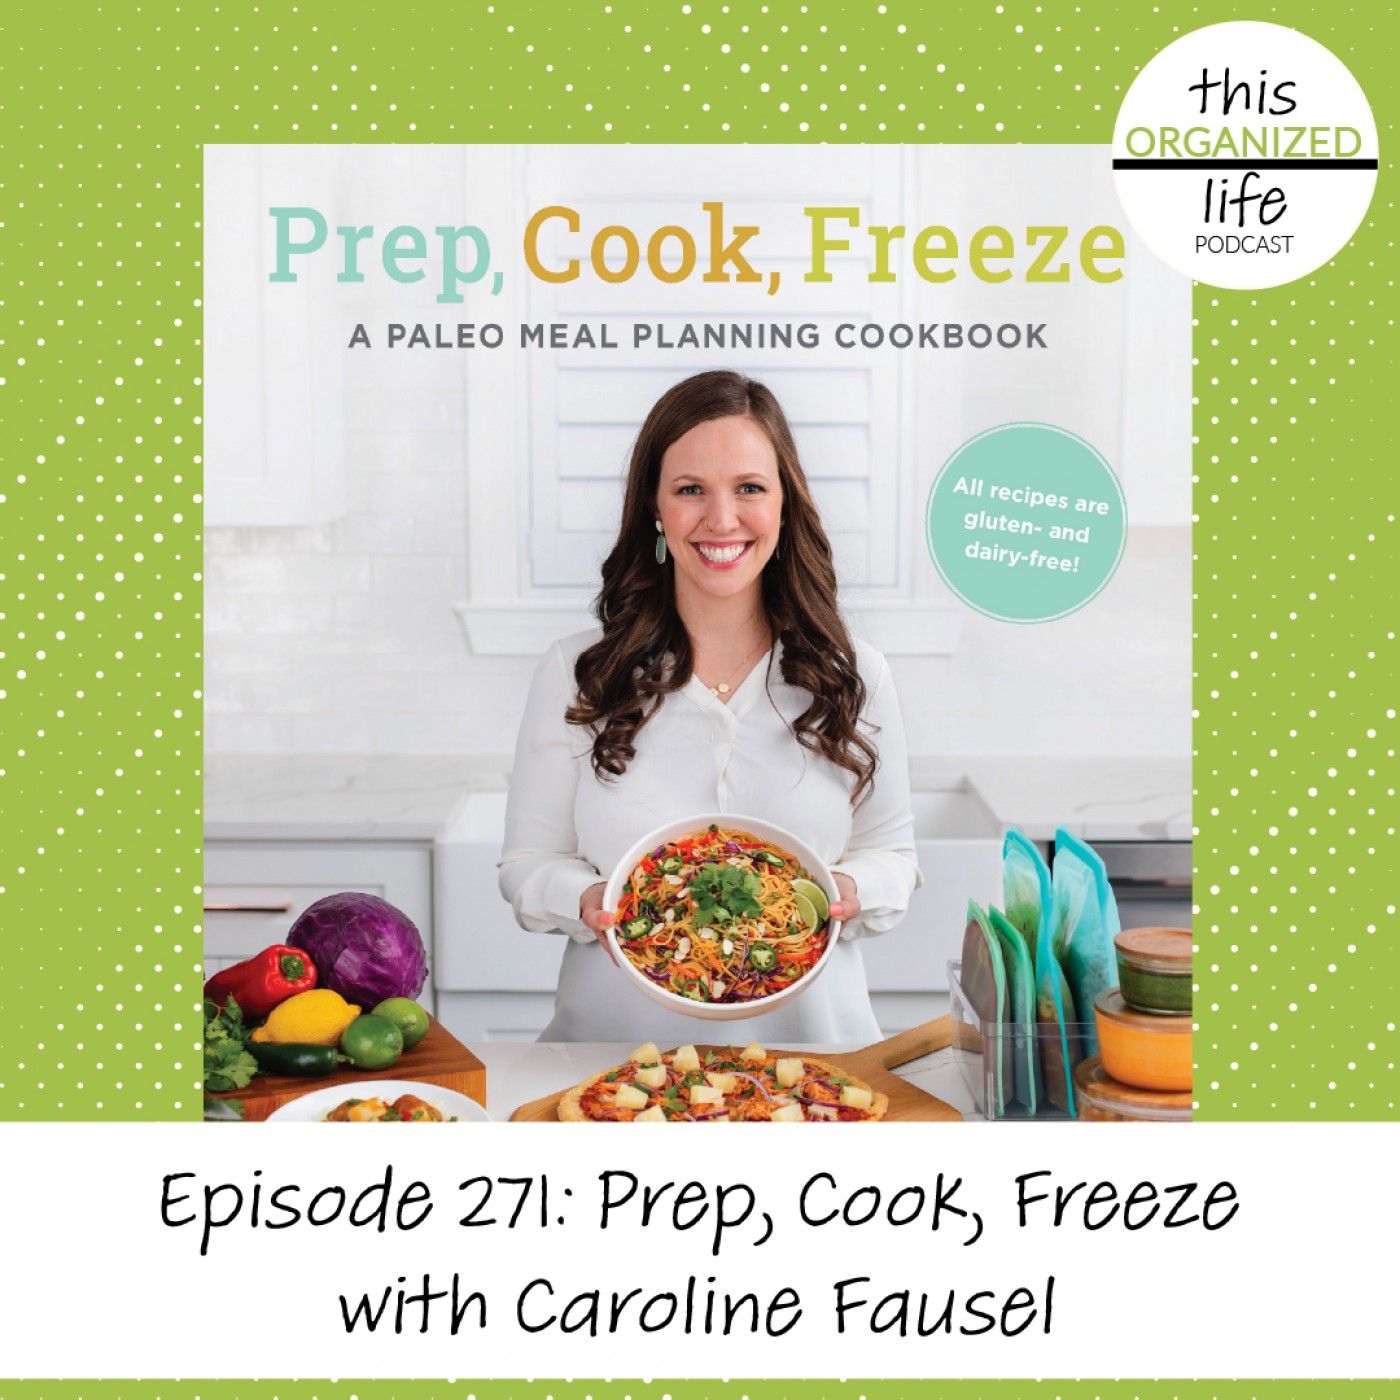 Ep 271: Prep, Cook, Freeze with Caroline Fausel